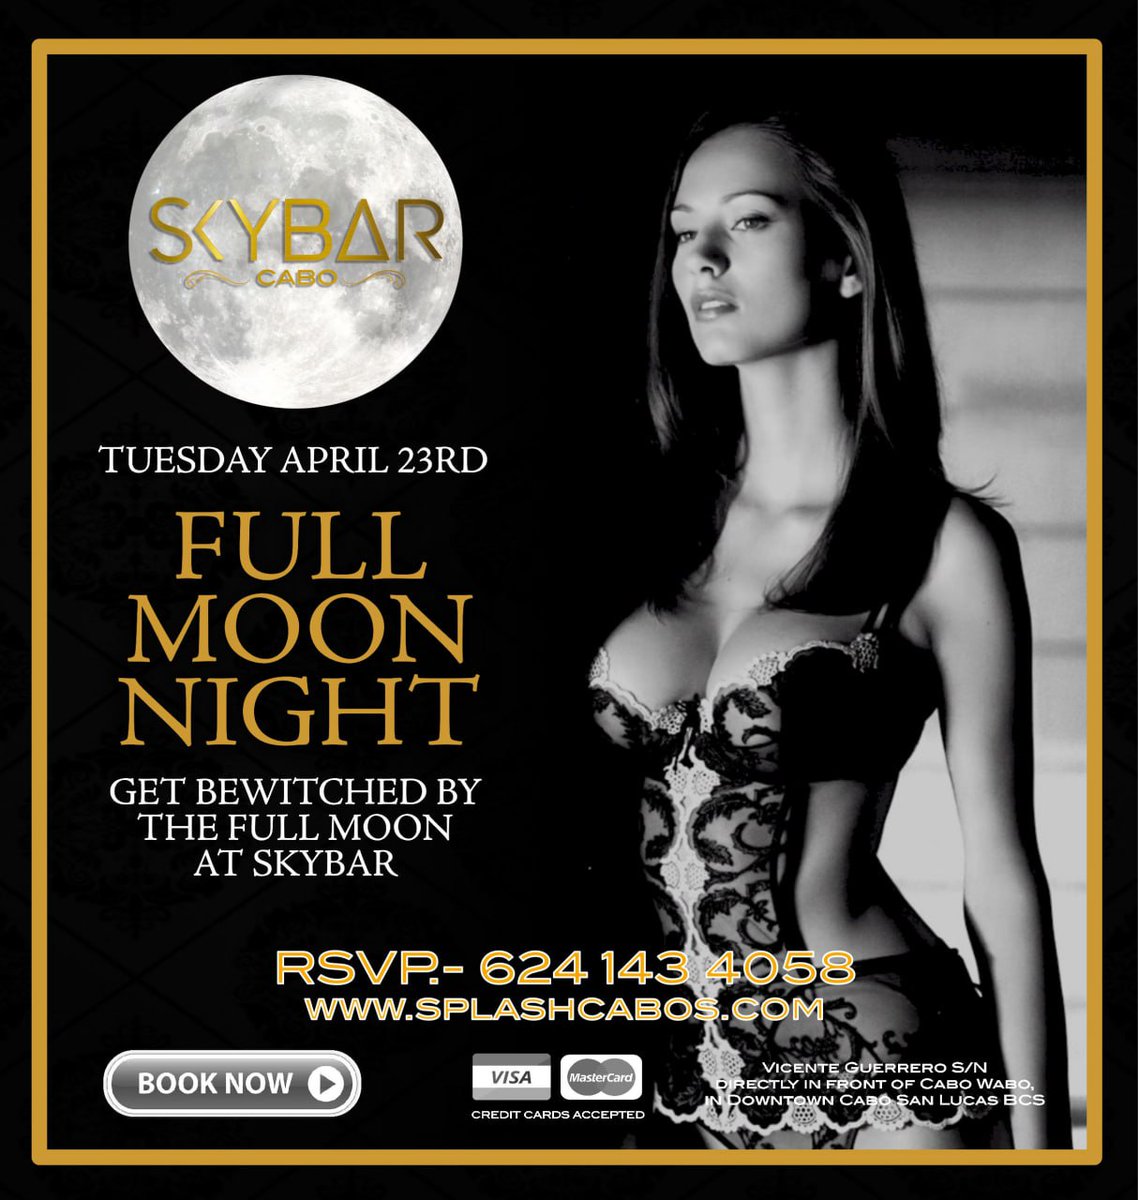 Splash & SkyBar presents: Full Moon Night!!
TUESDAY APRIL 23RD

Reservations: 624-1434058
splashcabos.com
Located directly in front of Cabo Wabo in Cabo San Lucas, Baja, Mexico

#Cabo #Splash #Skybar #ShowGirls #CaboSanLucas #LosCabos #CaboWabo #Fullmoon